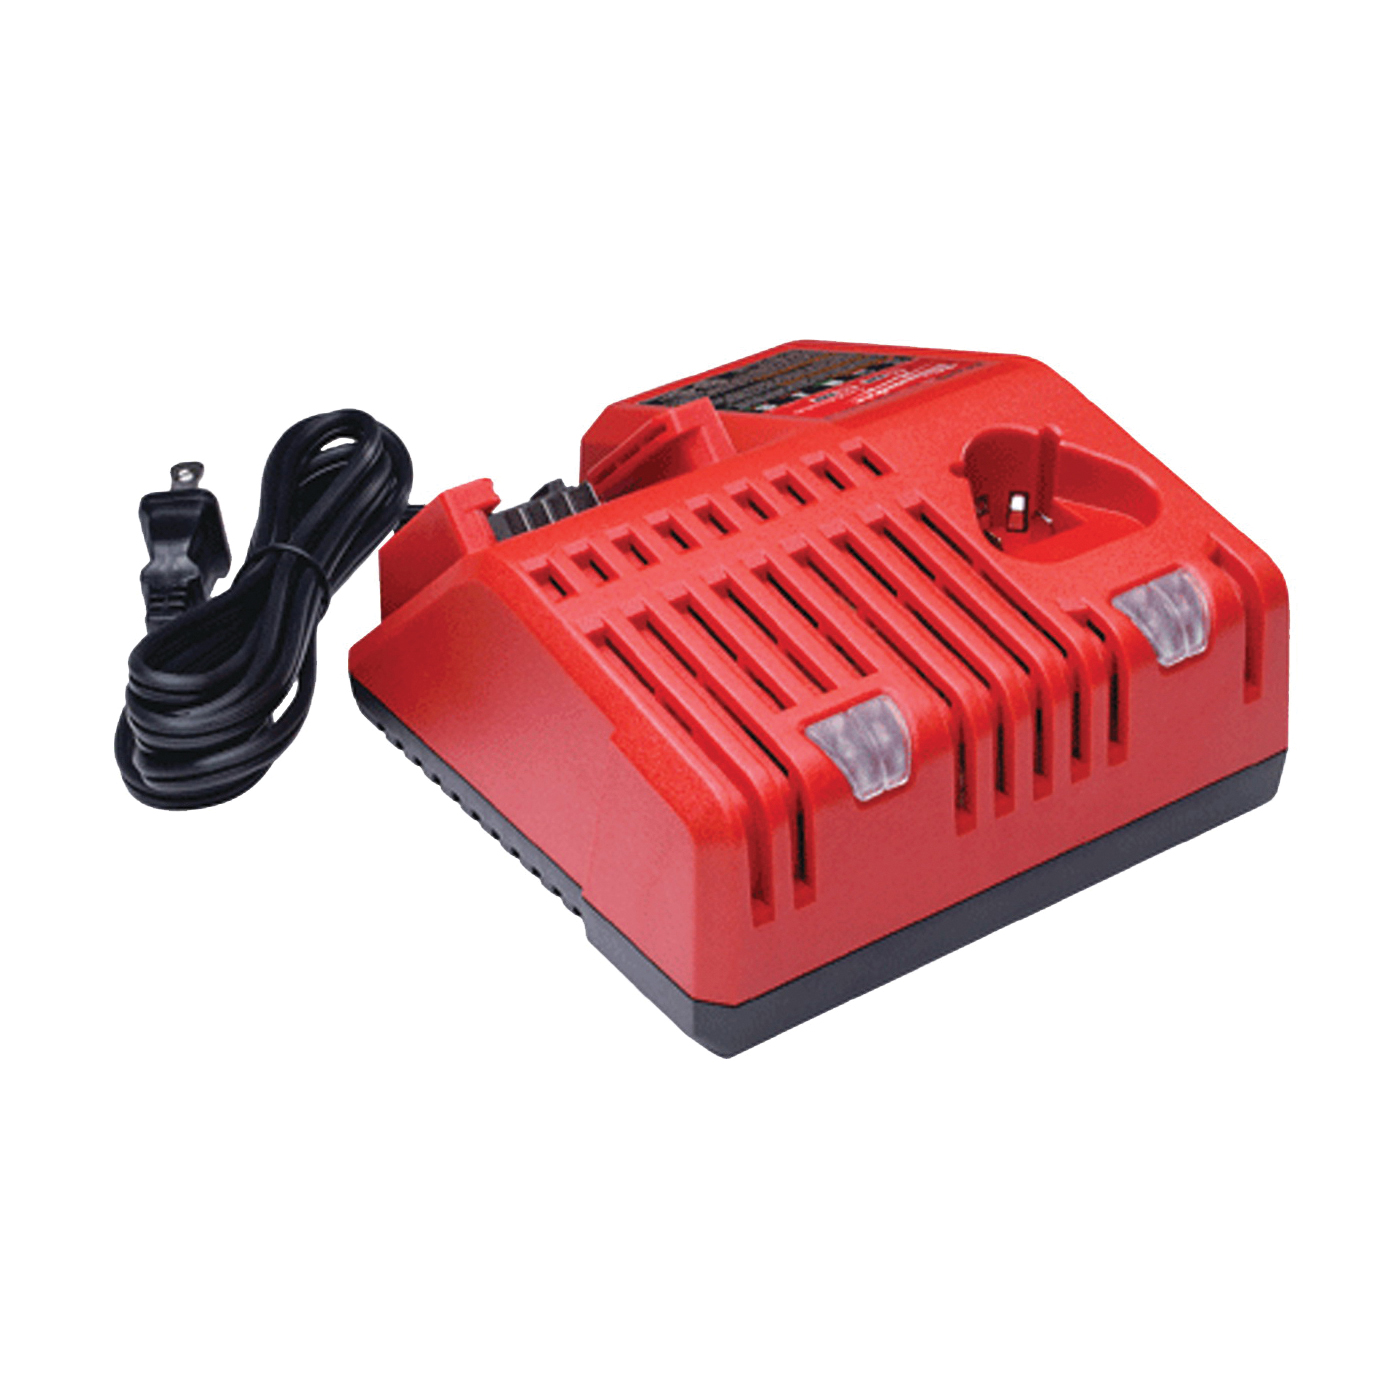 Milwaukee 48-59-1812 Multi-Voltage Charger, 12/18 V Input, 120 V Output, 1 hr Charge - 2